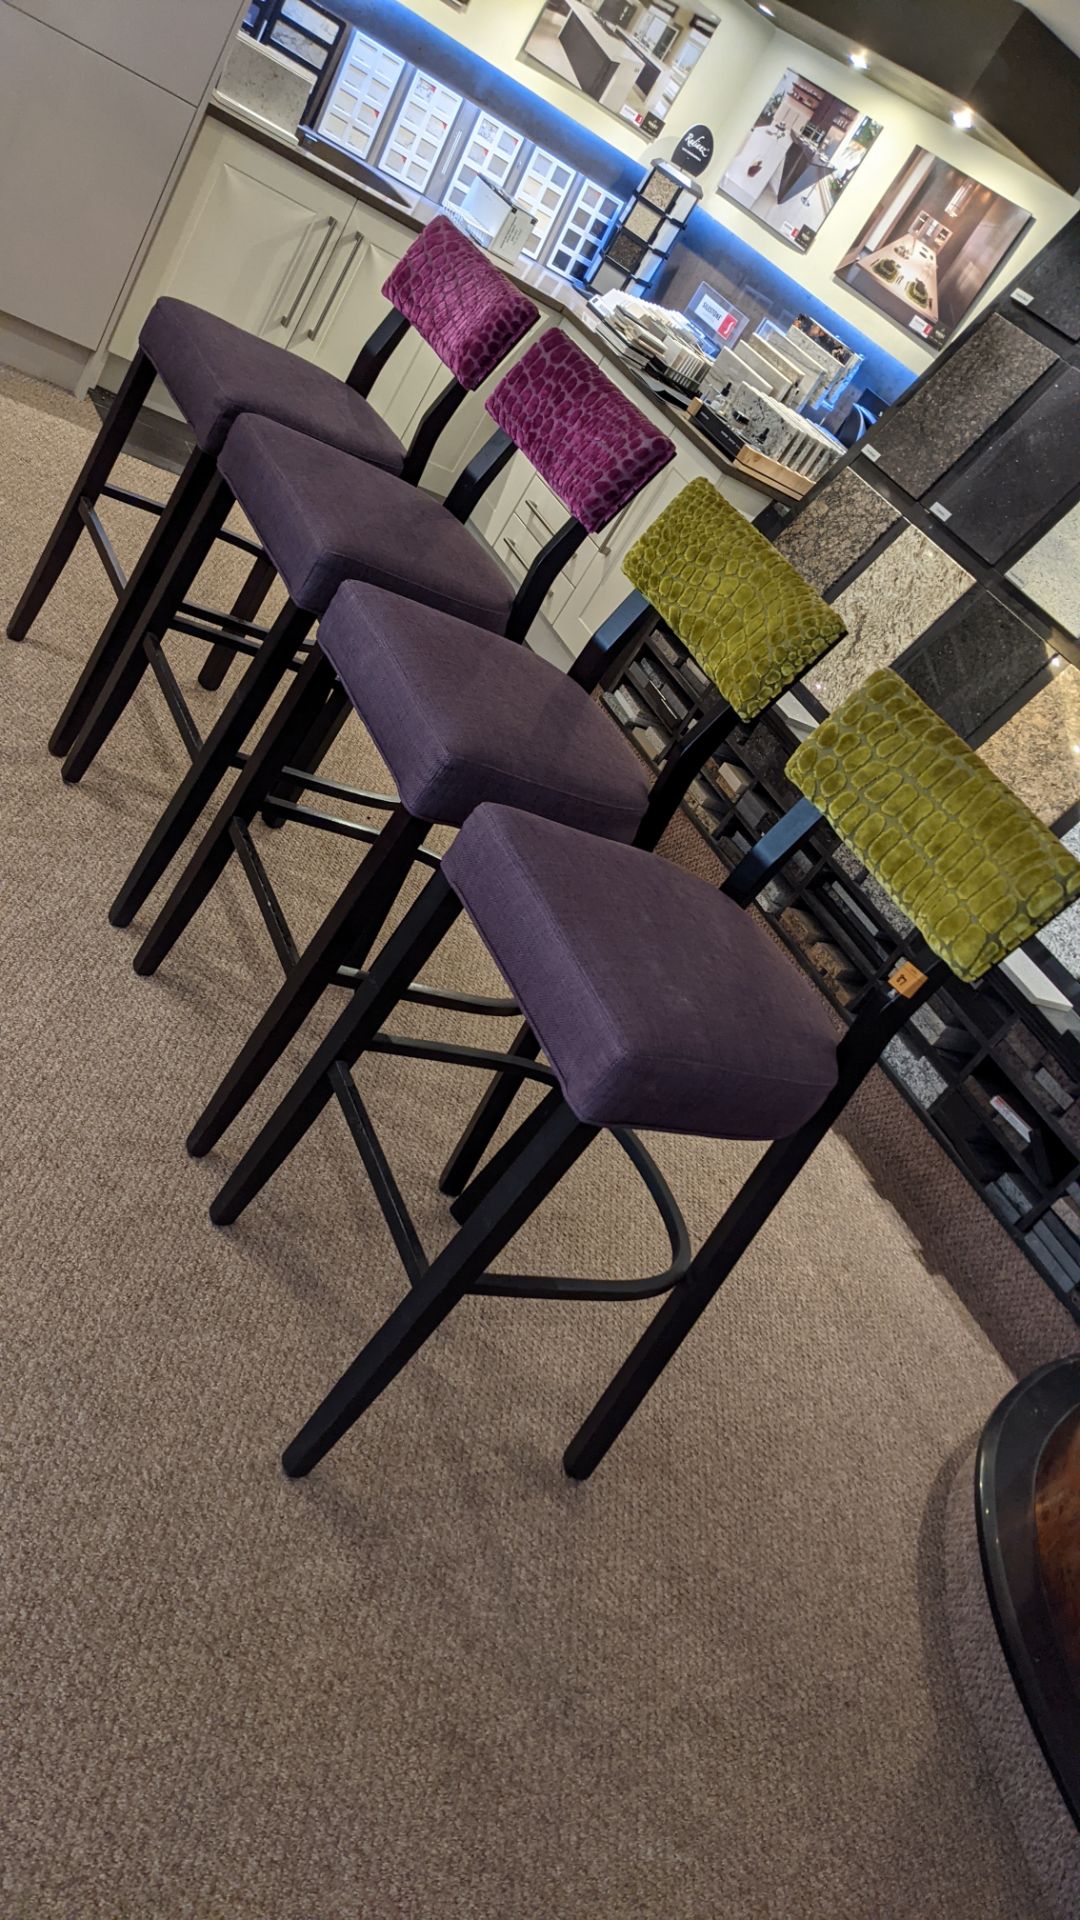 4 matching barstools in 2 different upholstered fabrics